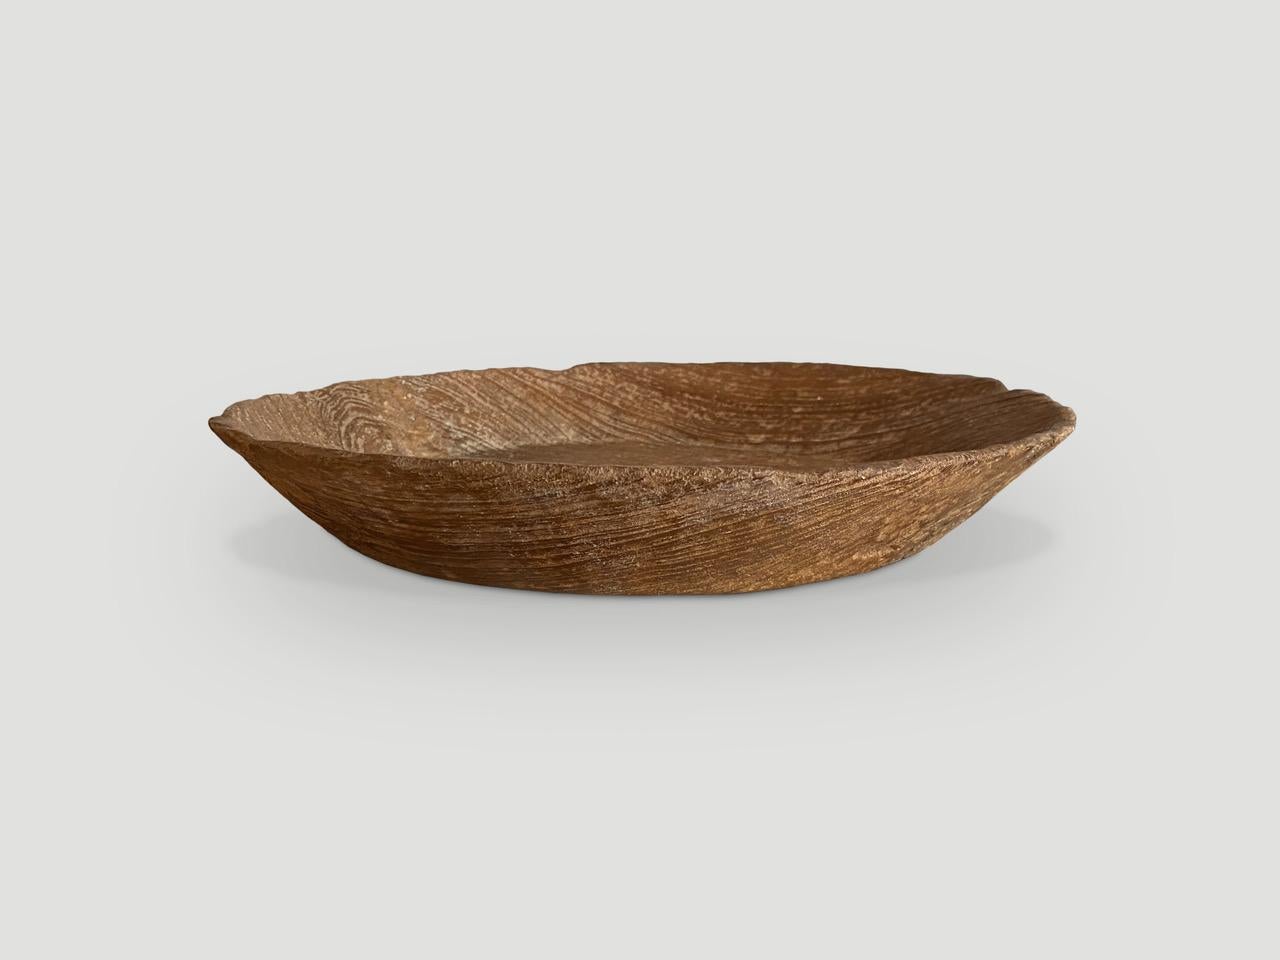 Beautiful bowl hand carved out of a single piece of teak wood. Both sculptural and usable.

This bowl was handmade in the spirit of Wabi-Sabi, a Japanese philosophy that beauty can be found in imperfection and impermanence. It is a beauty of